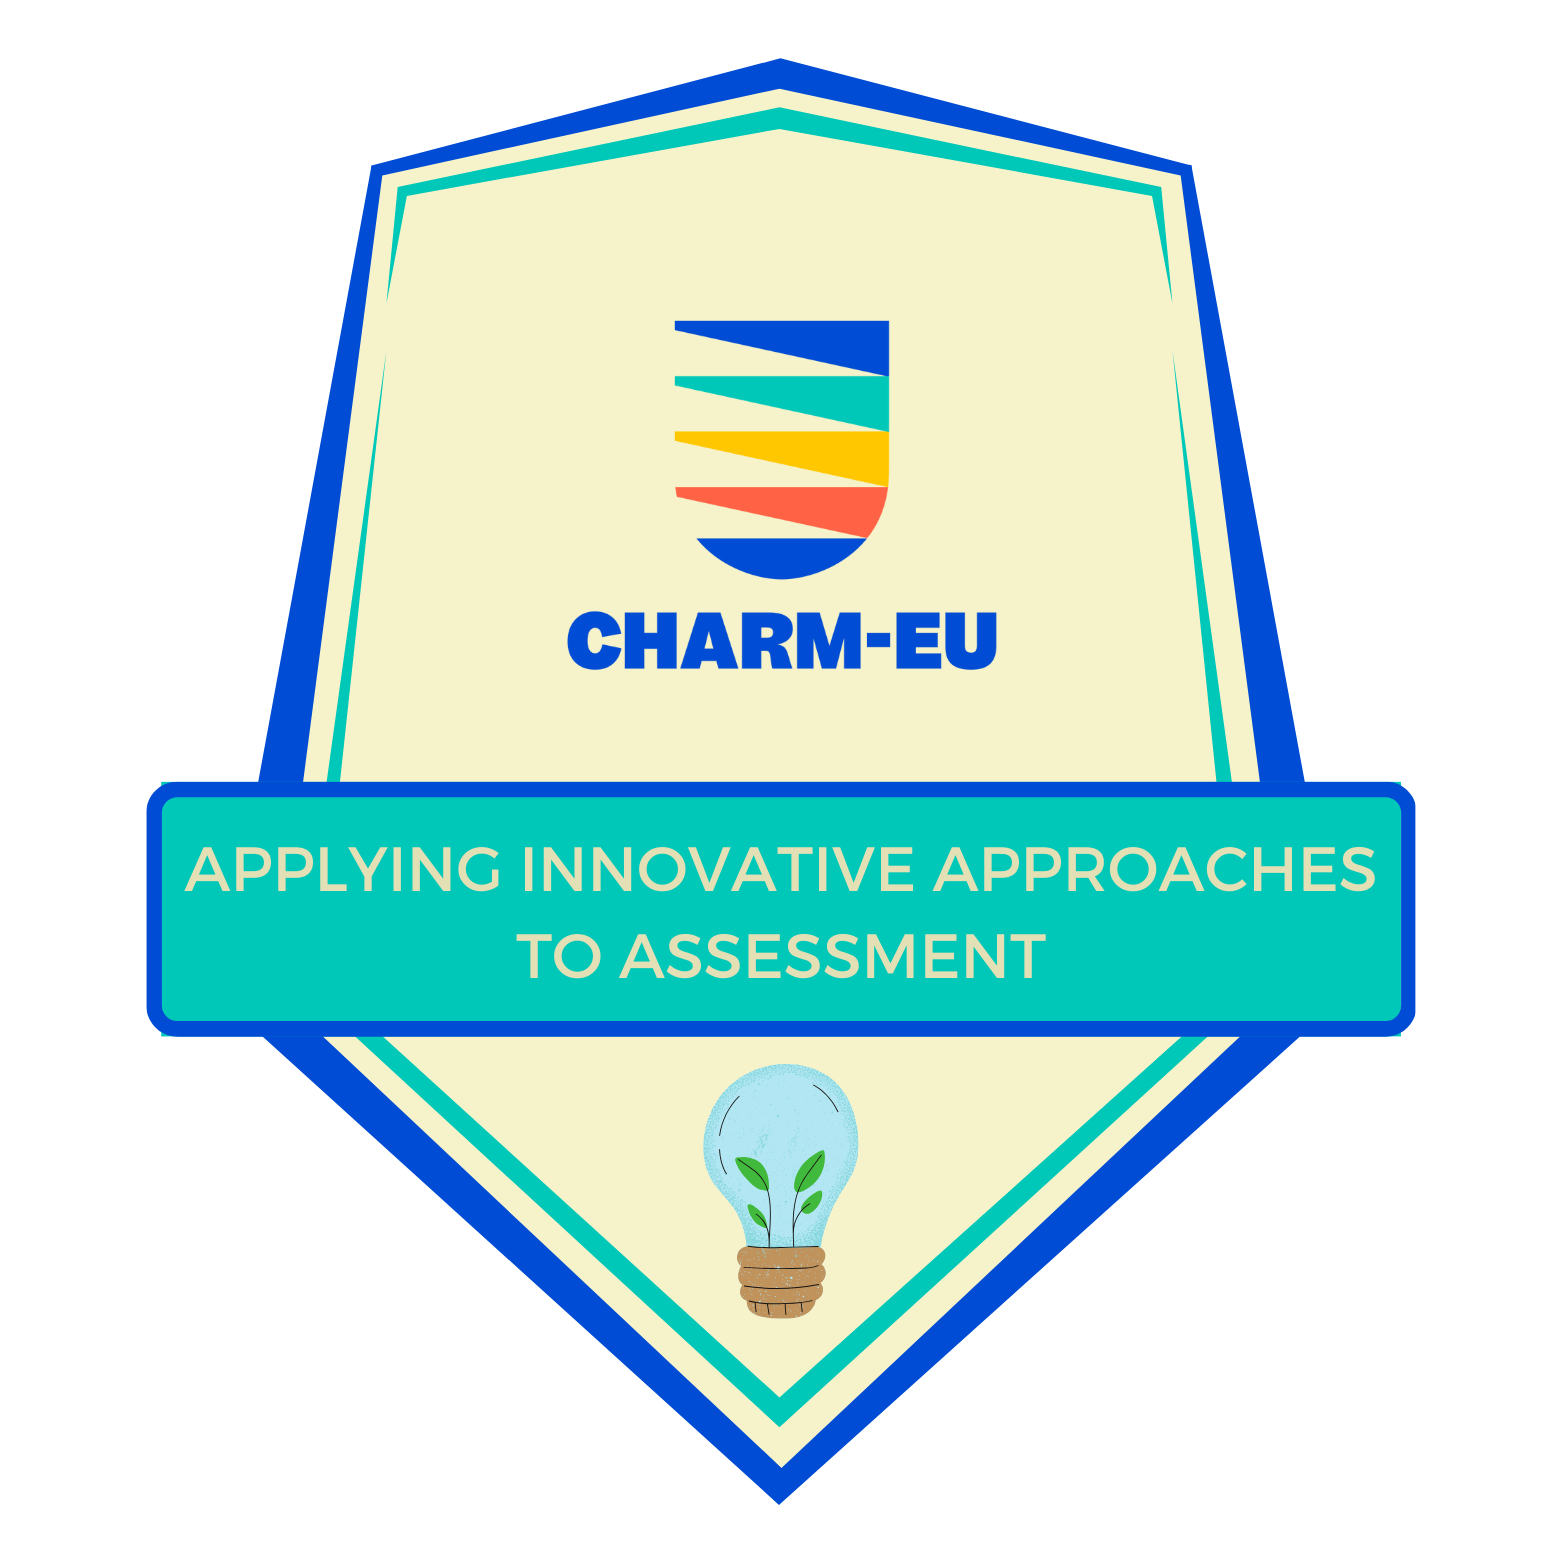 EduBadge for CHARM-EU. The CHARM logo on top, then the text "Applying innovative approaches to assessment", and below that a lightbulb with two plants growing inside of it.